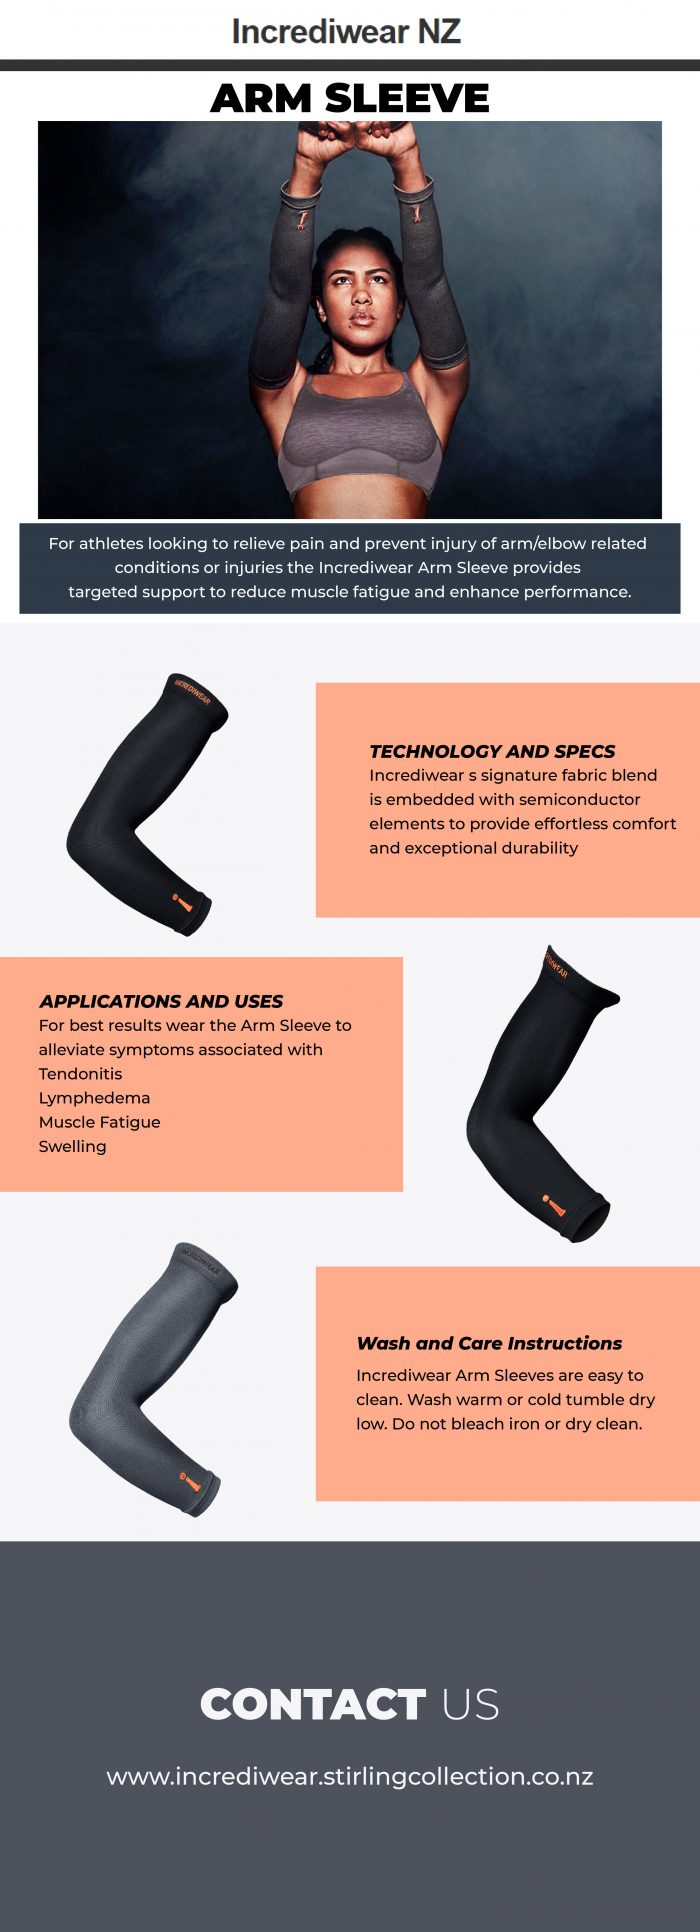 Relieve pain with the arm sleeve – Incrediwear NZ